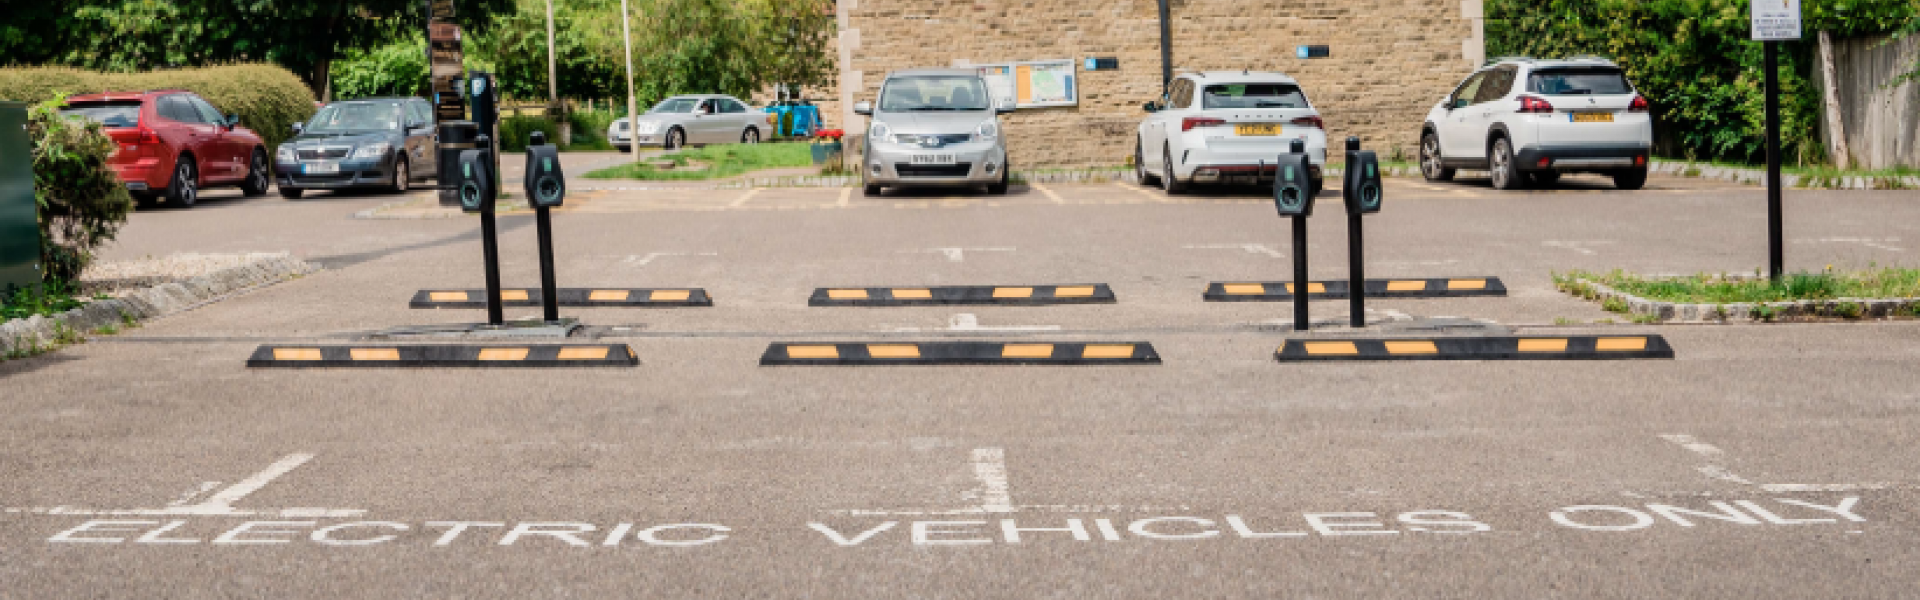 Electric-vehicle charging coming to car parks in Conservative-run Wealden